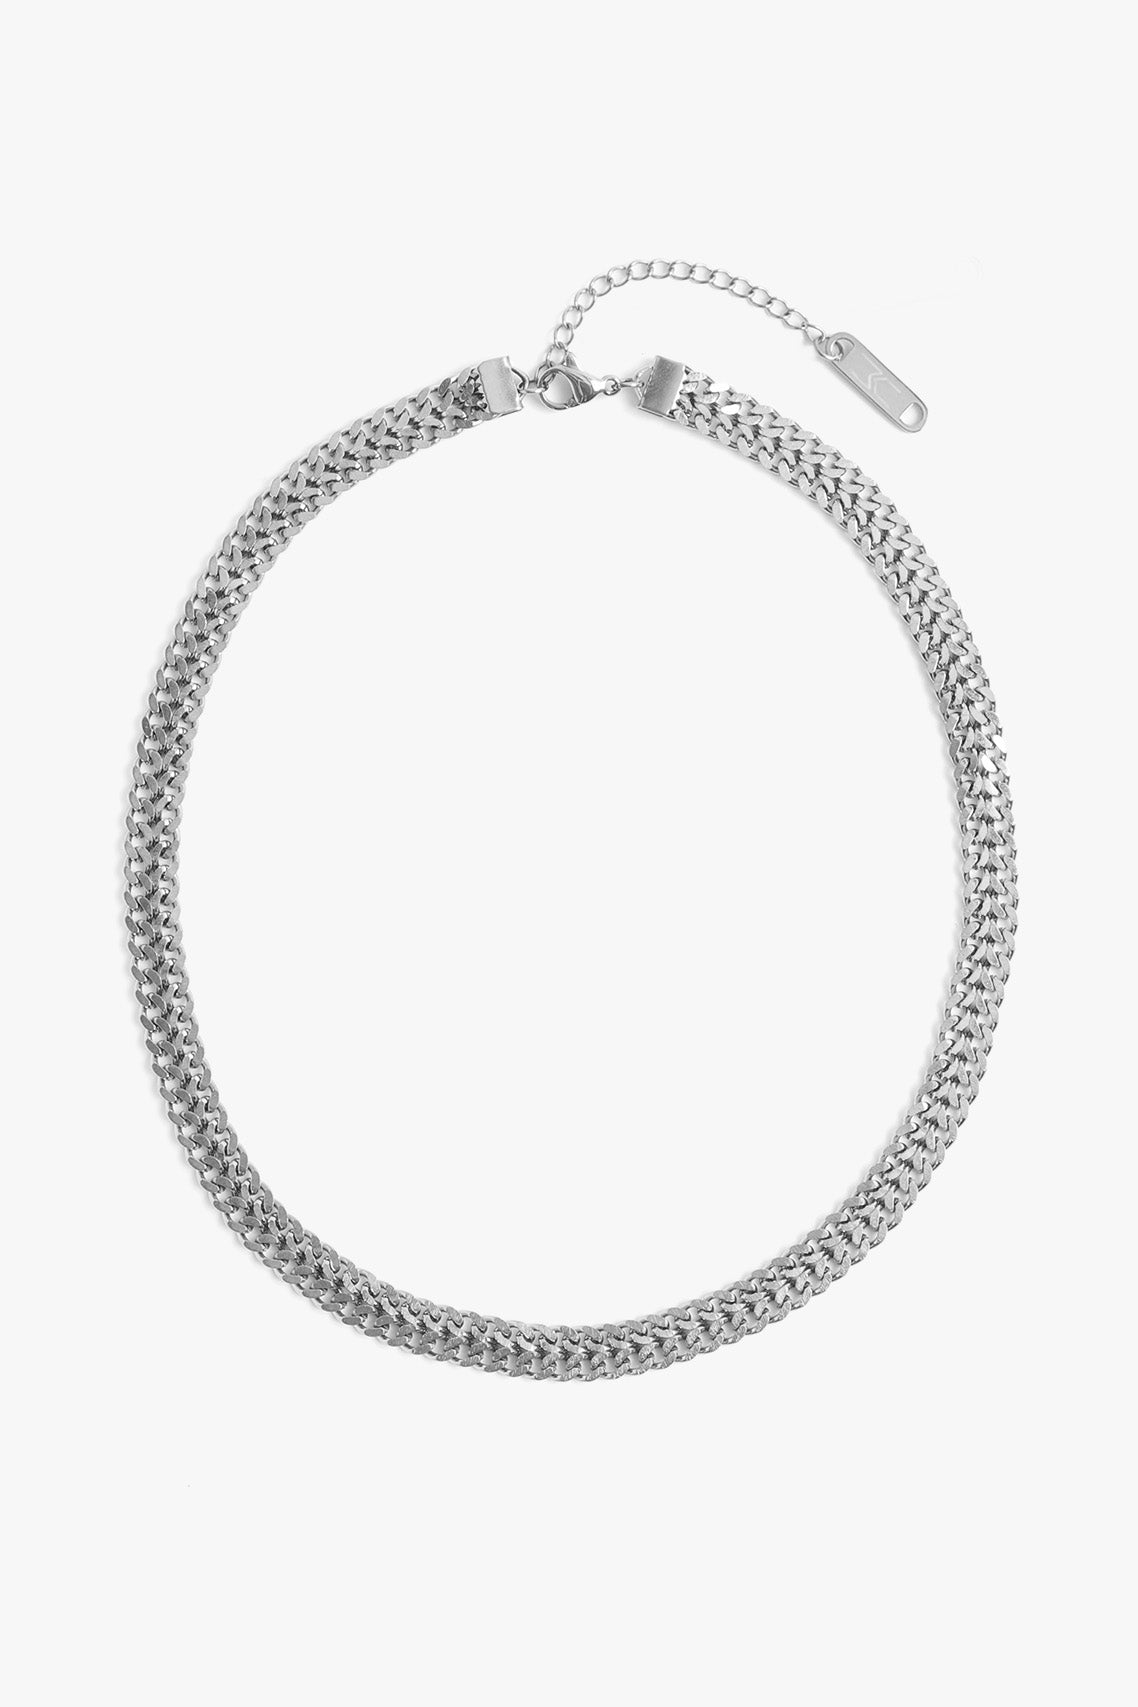 Marrin Costello Jewelry Lattice Choker woven chain edgy necklace with lobster clasp closure and extender. Waterproof, sustainable, hypoallergenic. Polished stainless steel.